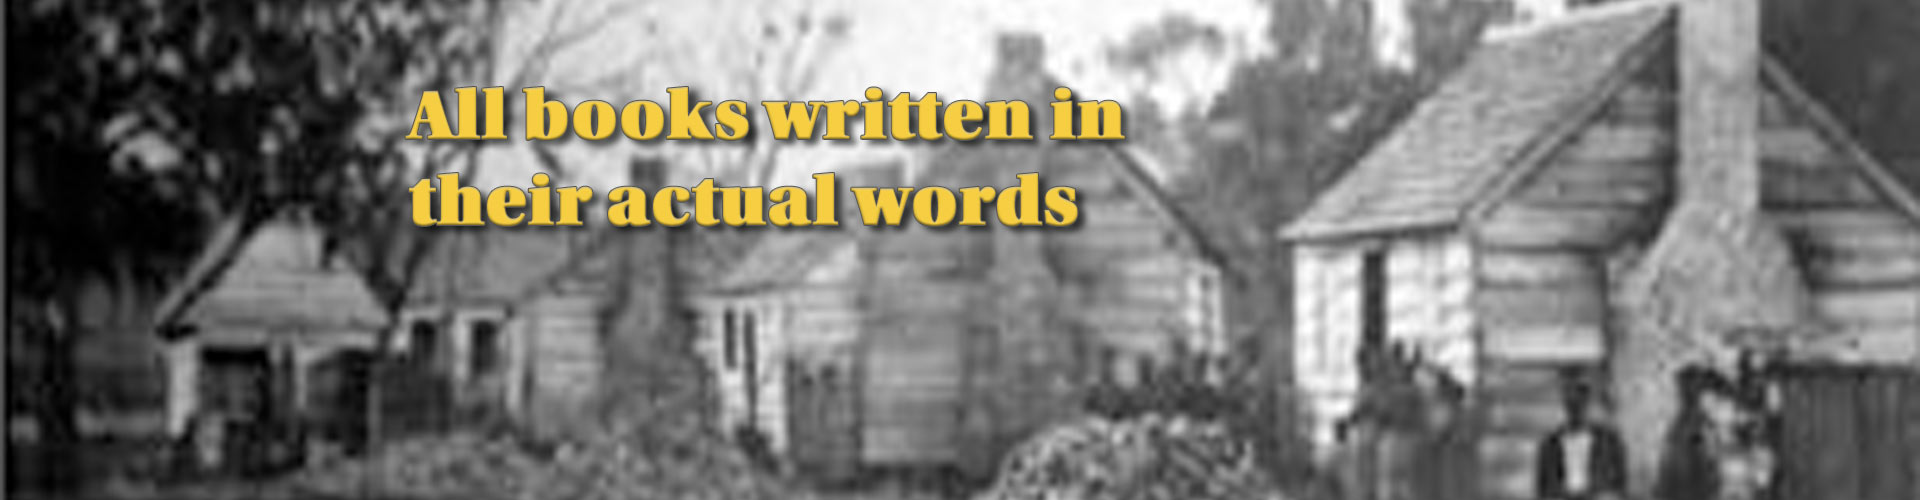 The words *All books written in their actual words* are written over photo of many slaves and cabins